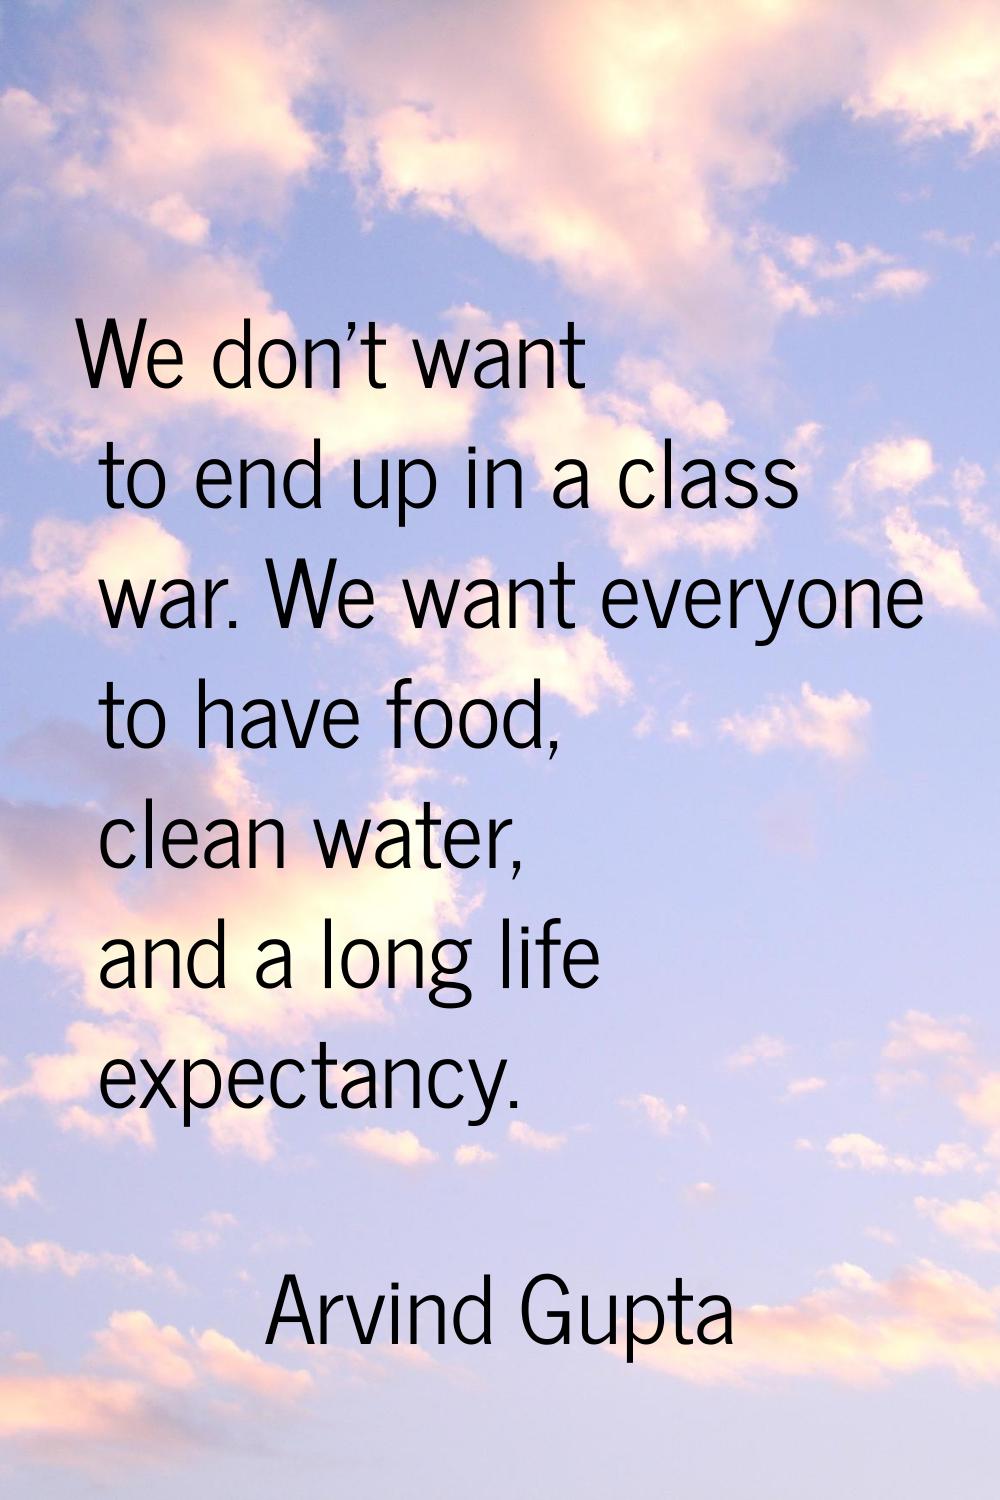 We don't want to end up in a class war. We want everyone to have food, clean water, and a long life